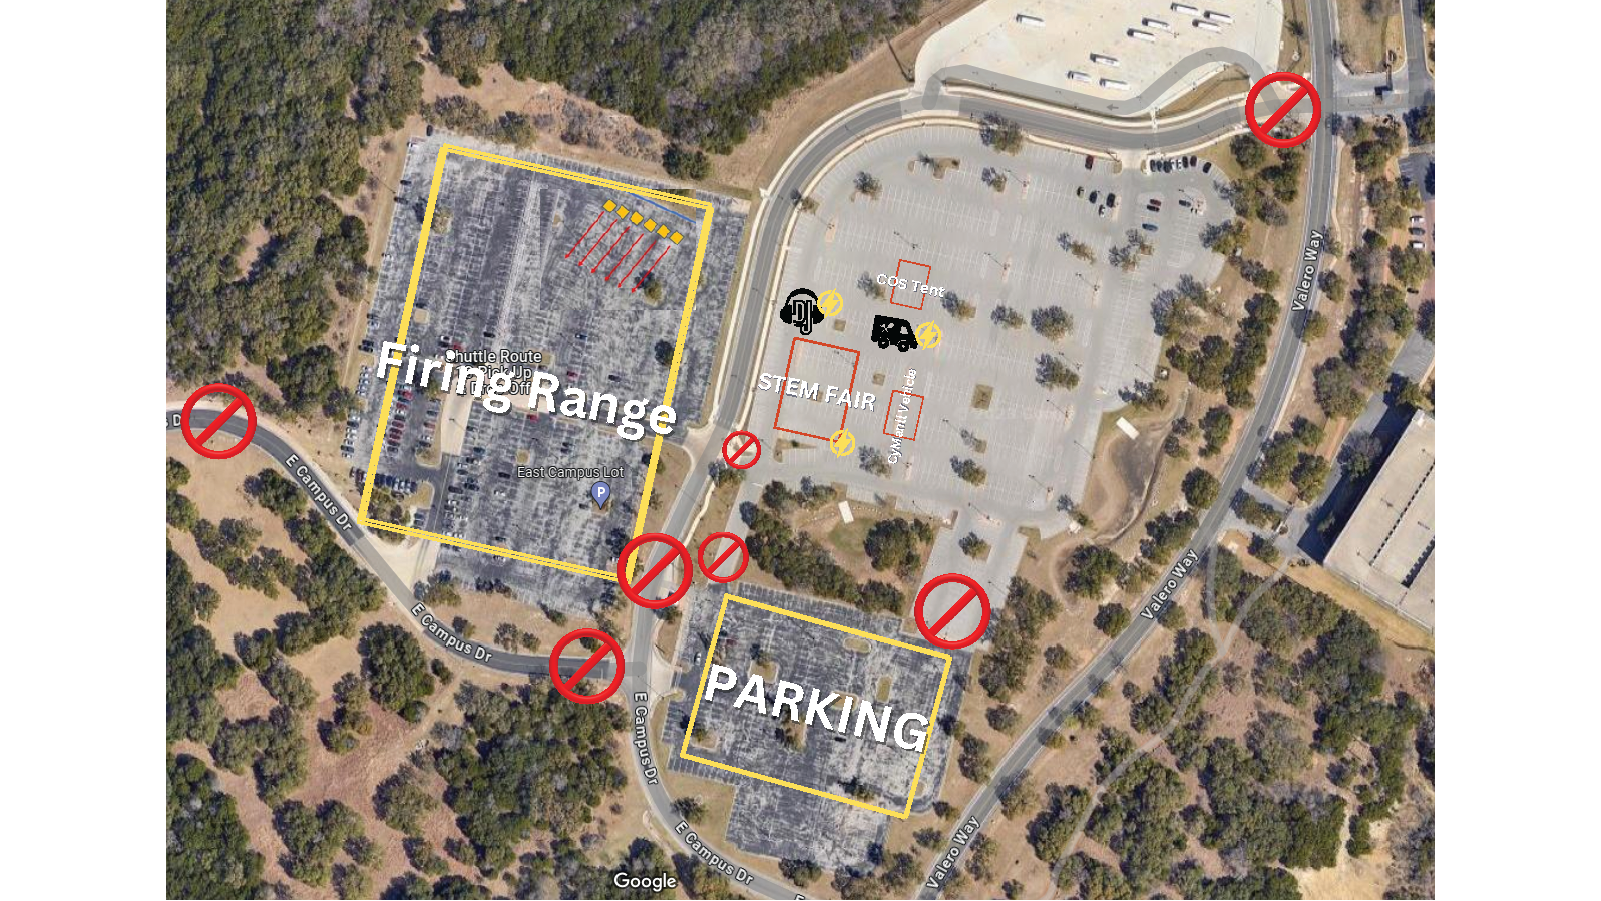 east-parking-lot-layout.png